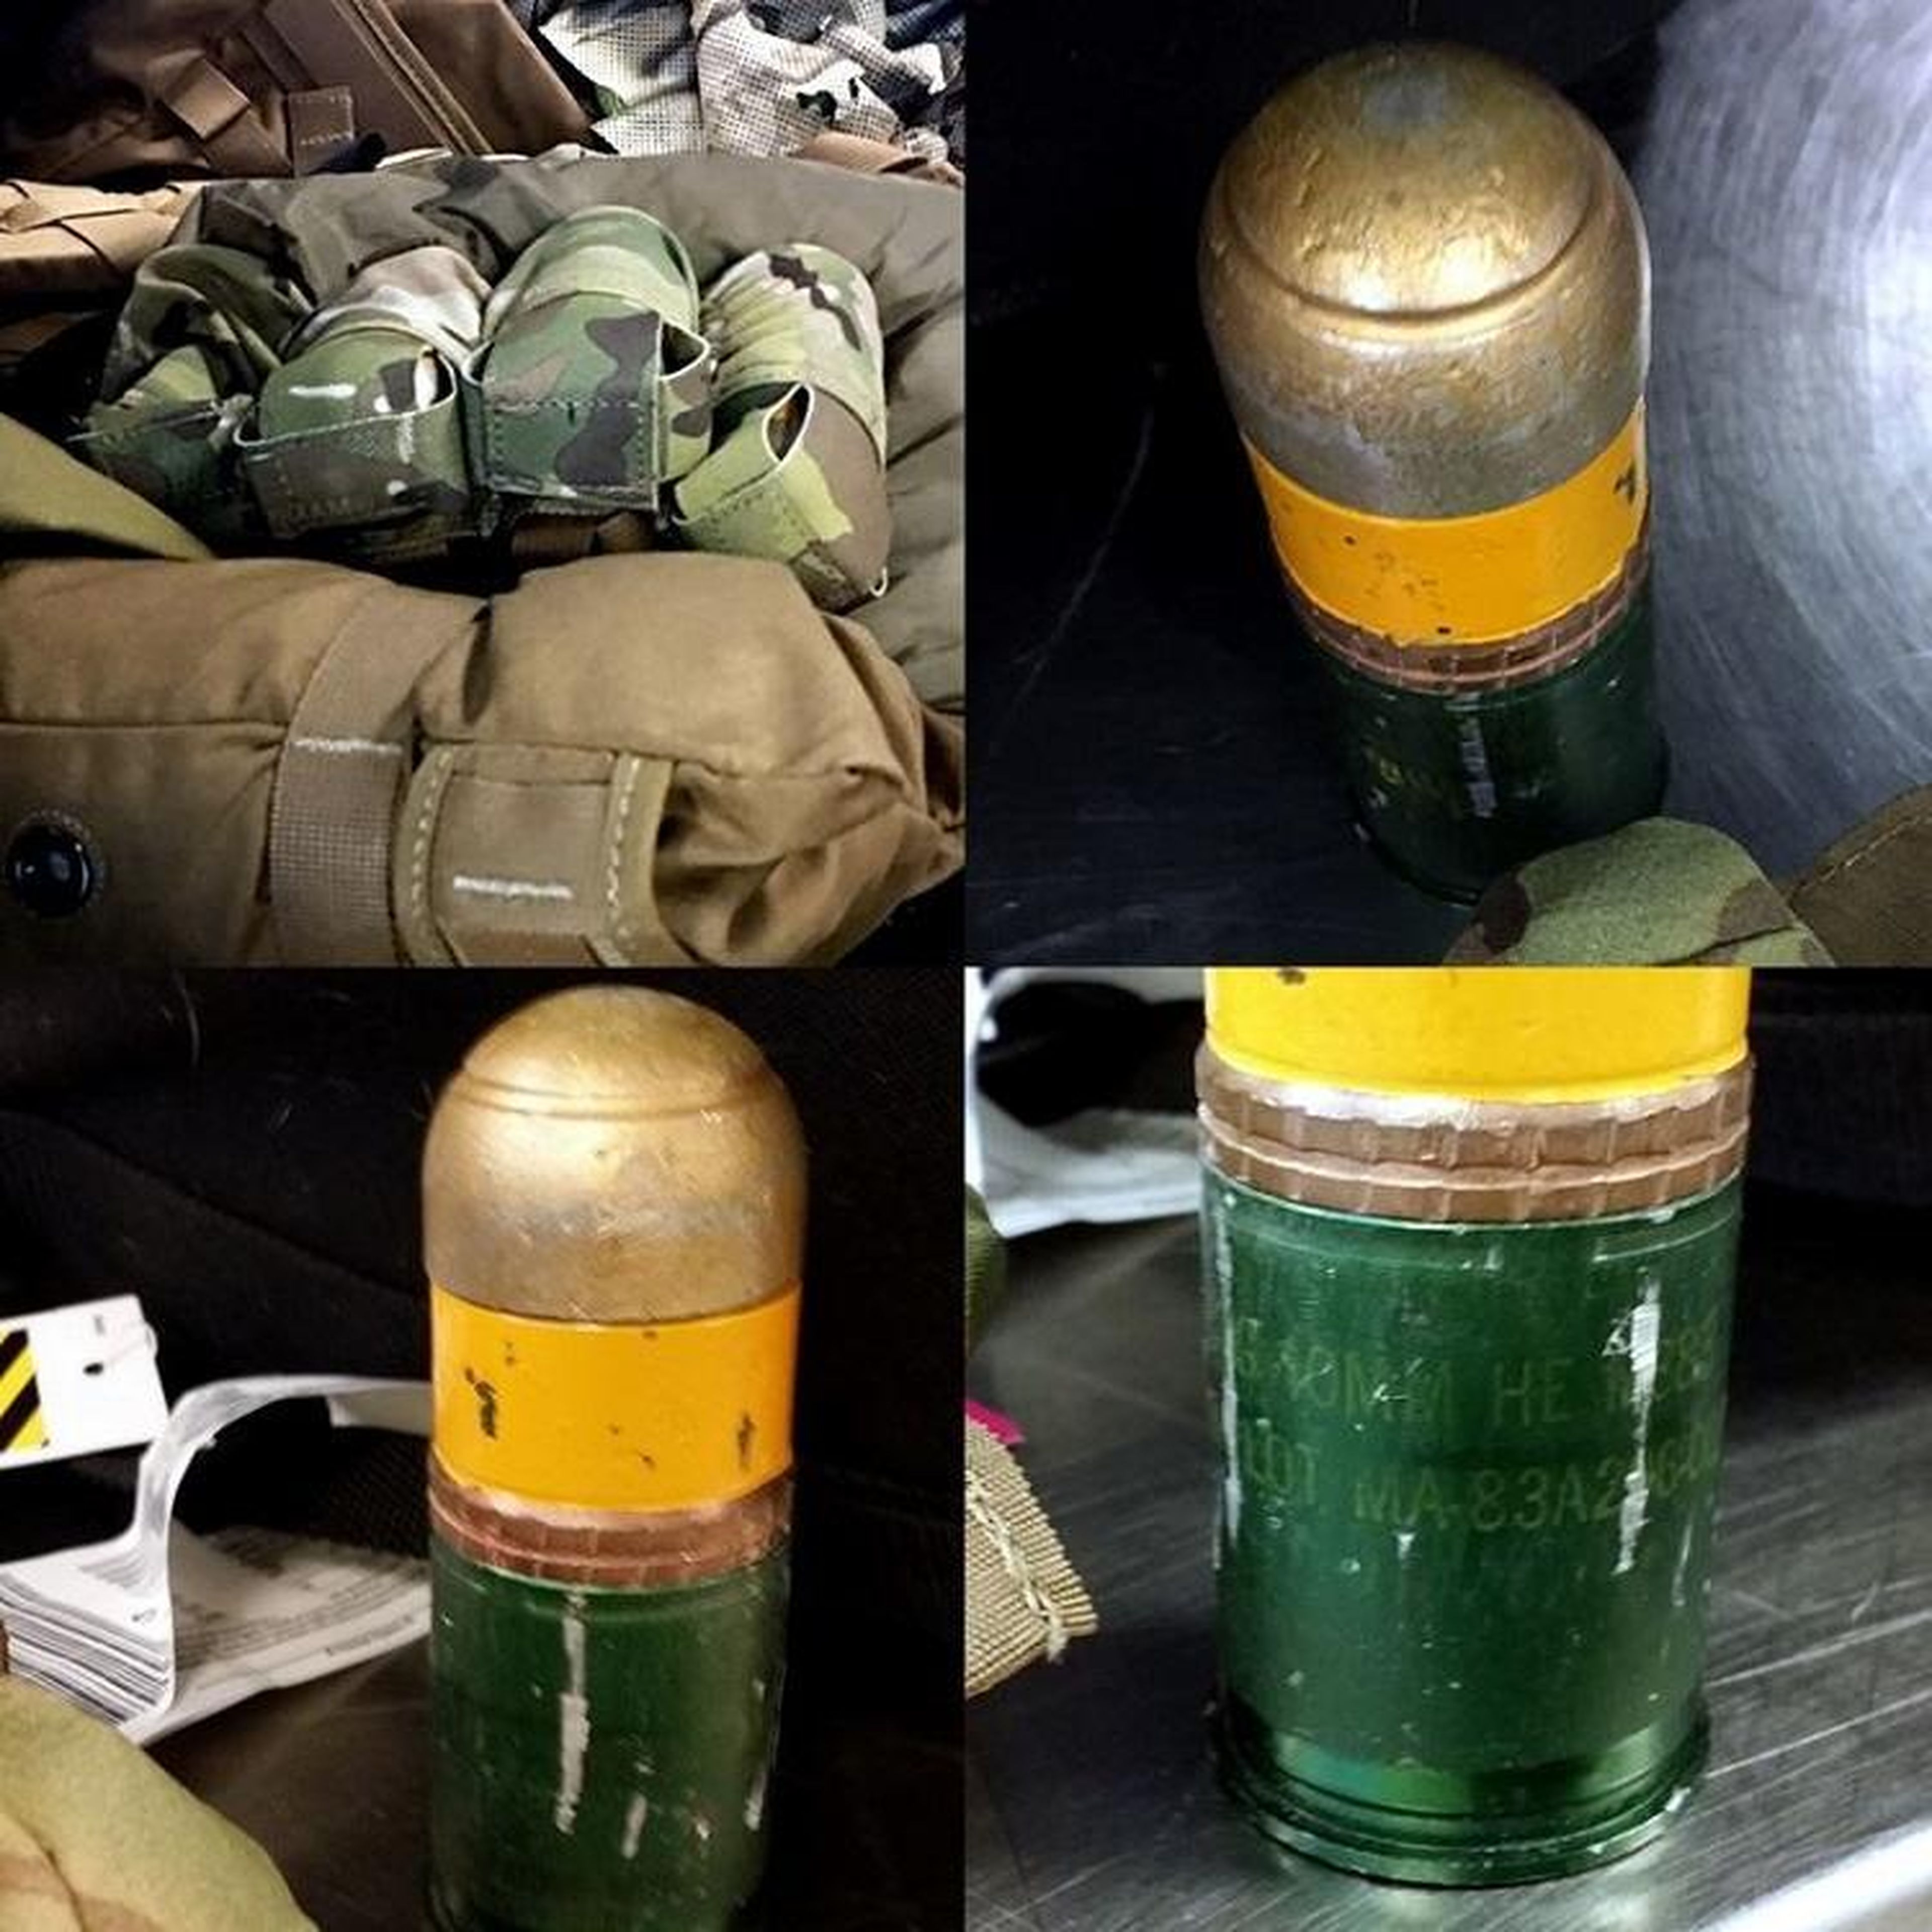 11. A collection of four 40mm grenades hidden inside a tactical vest